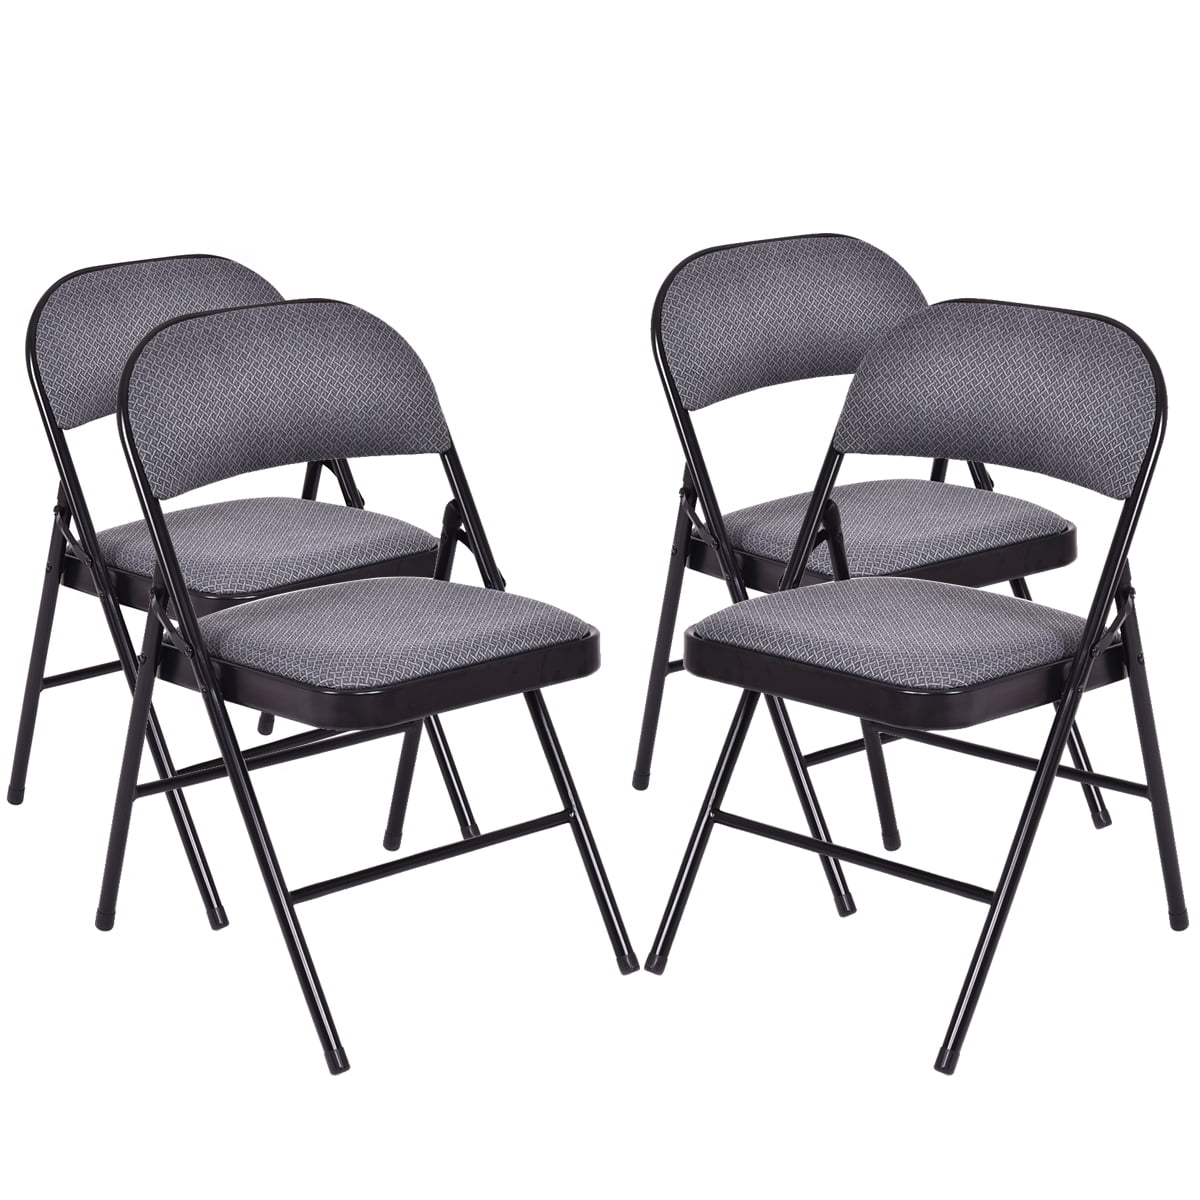 Topbuy Fabric Padded Folding Chair Portable Pack of 4 - Walmart.com